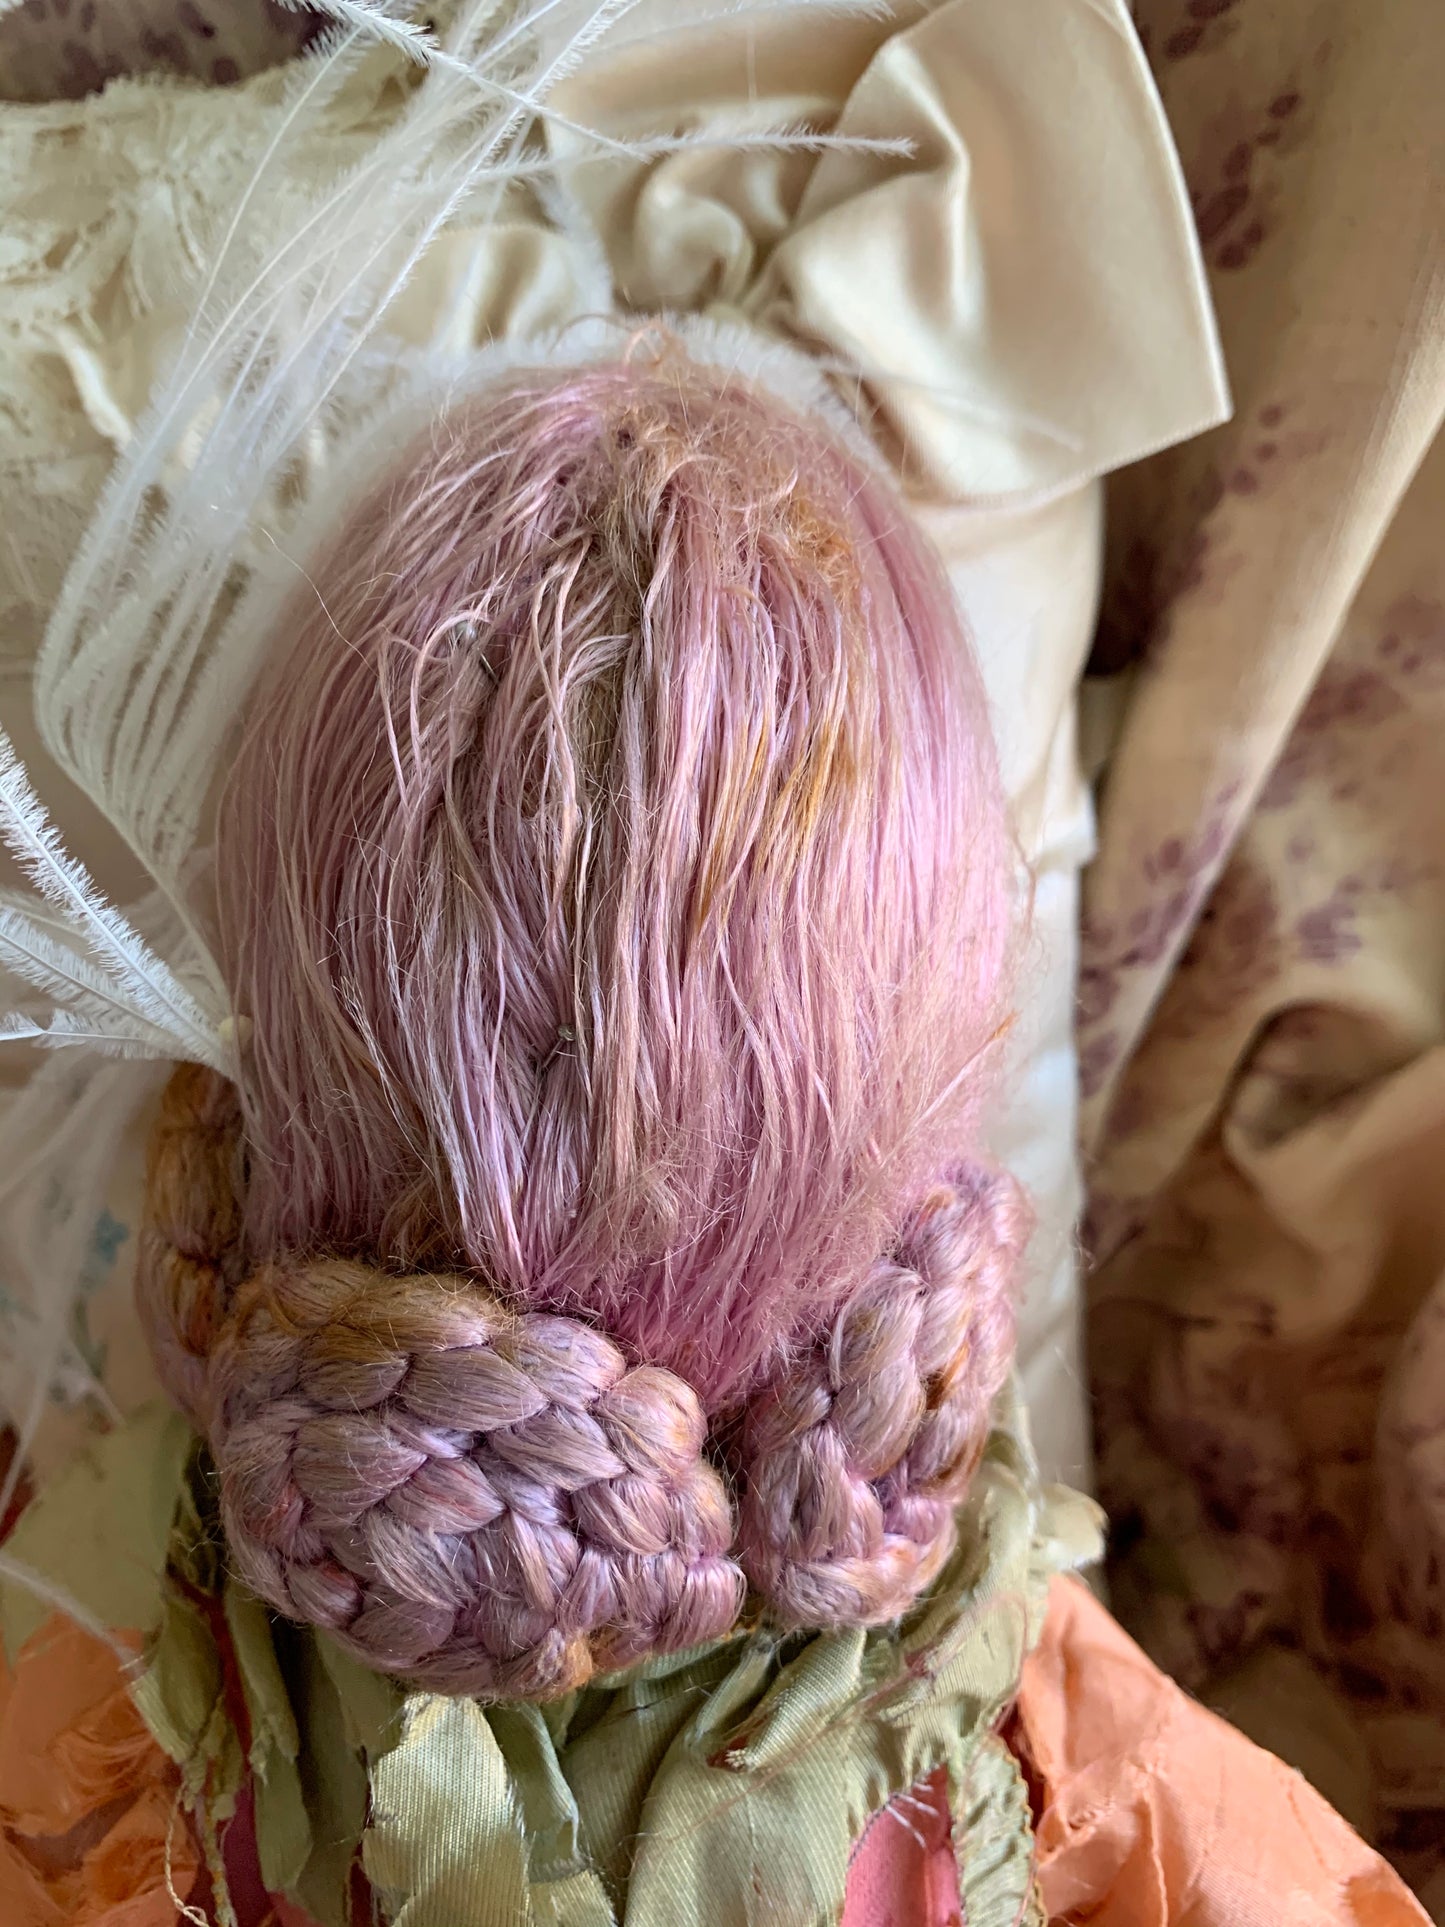 Vintage pink lavender hair flapper boudoir doll French style bed doll